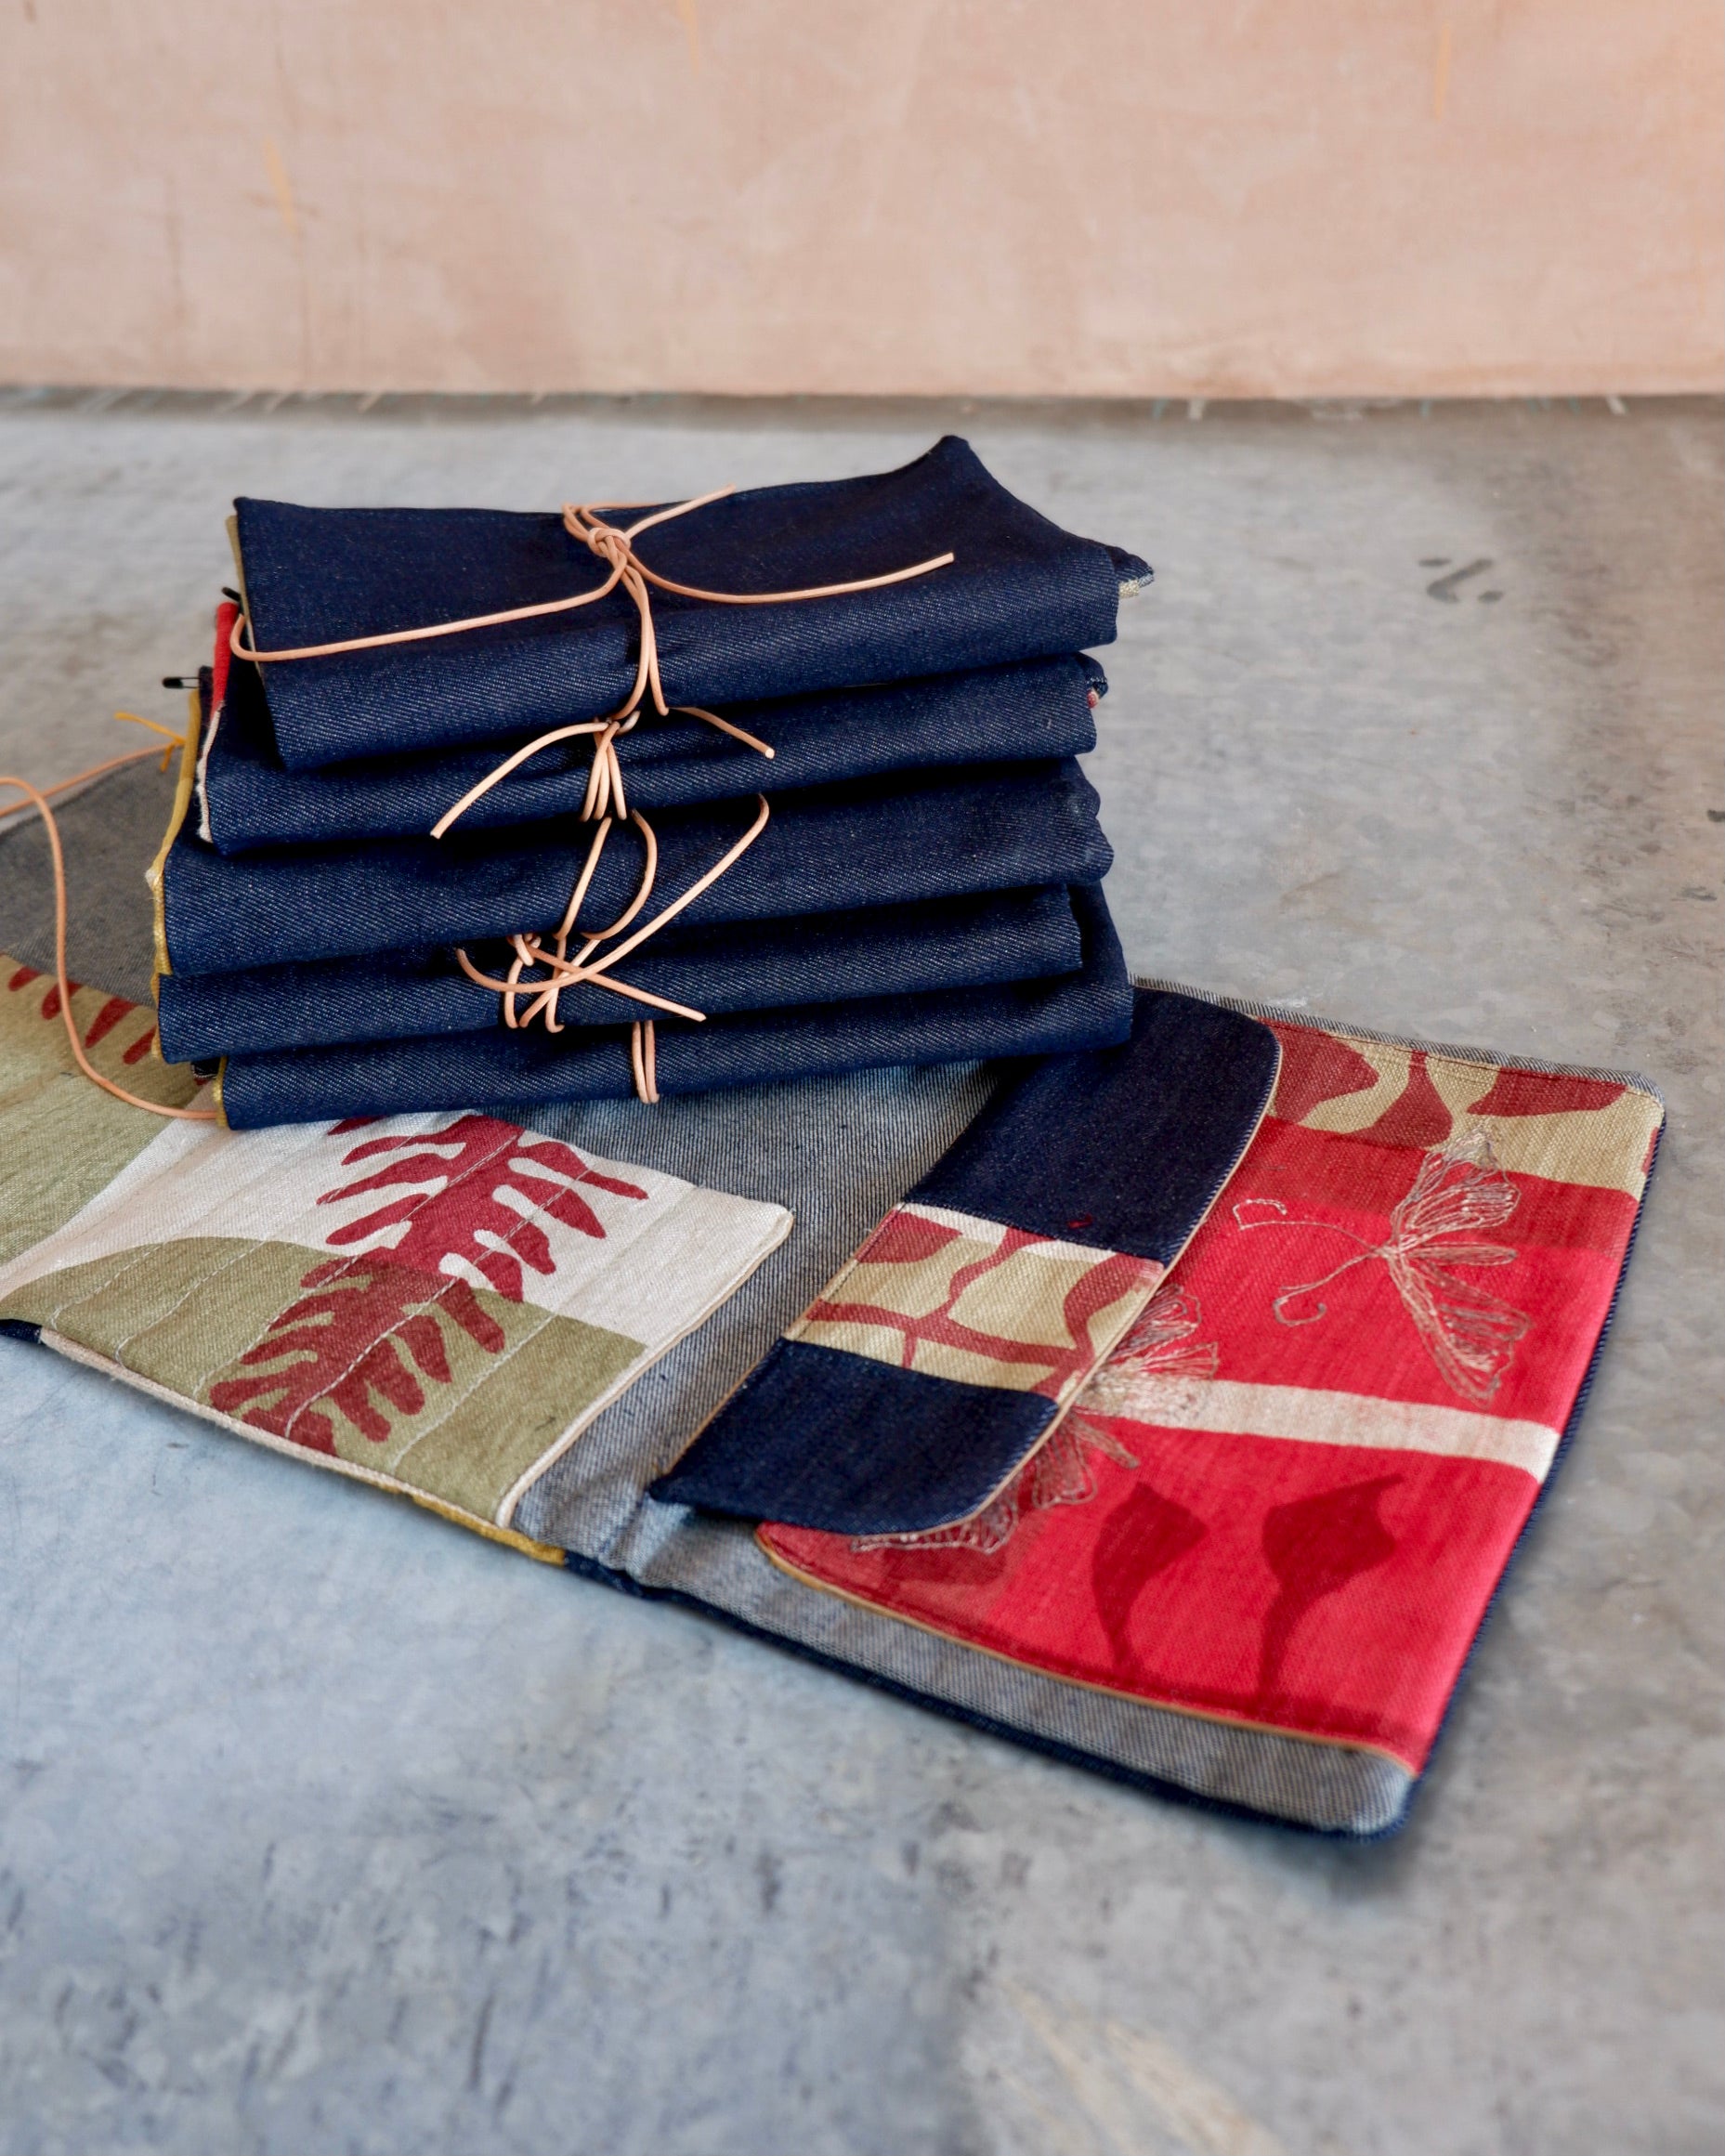 anna osbourne the speculating rook textiles embroidery screen print homeware Screenprinted linen and denim artist's tool wrap